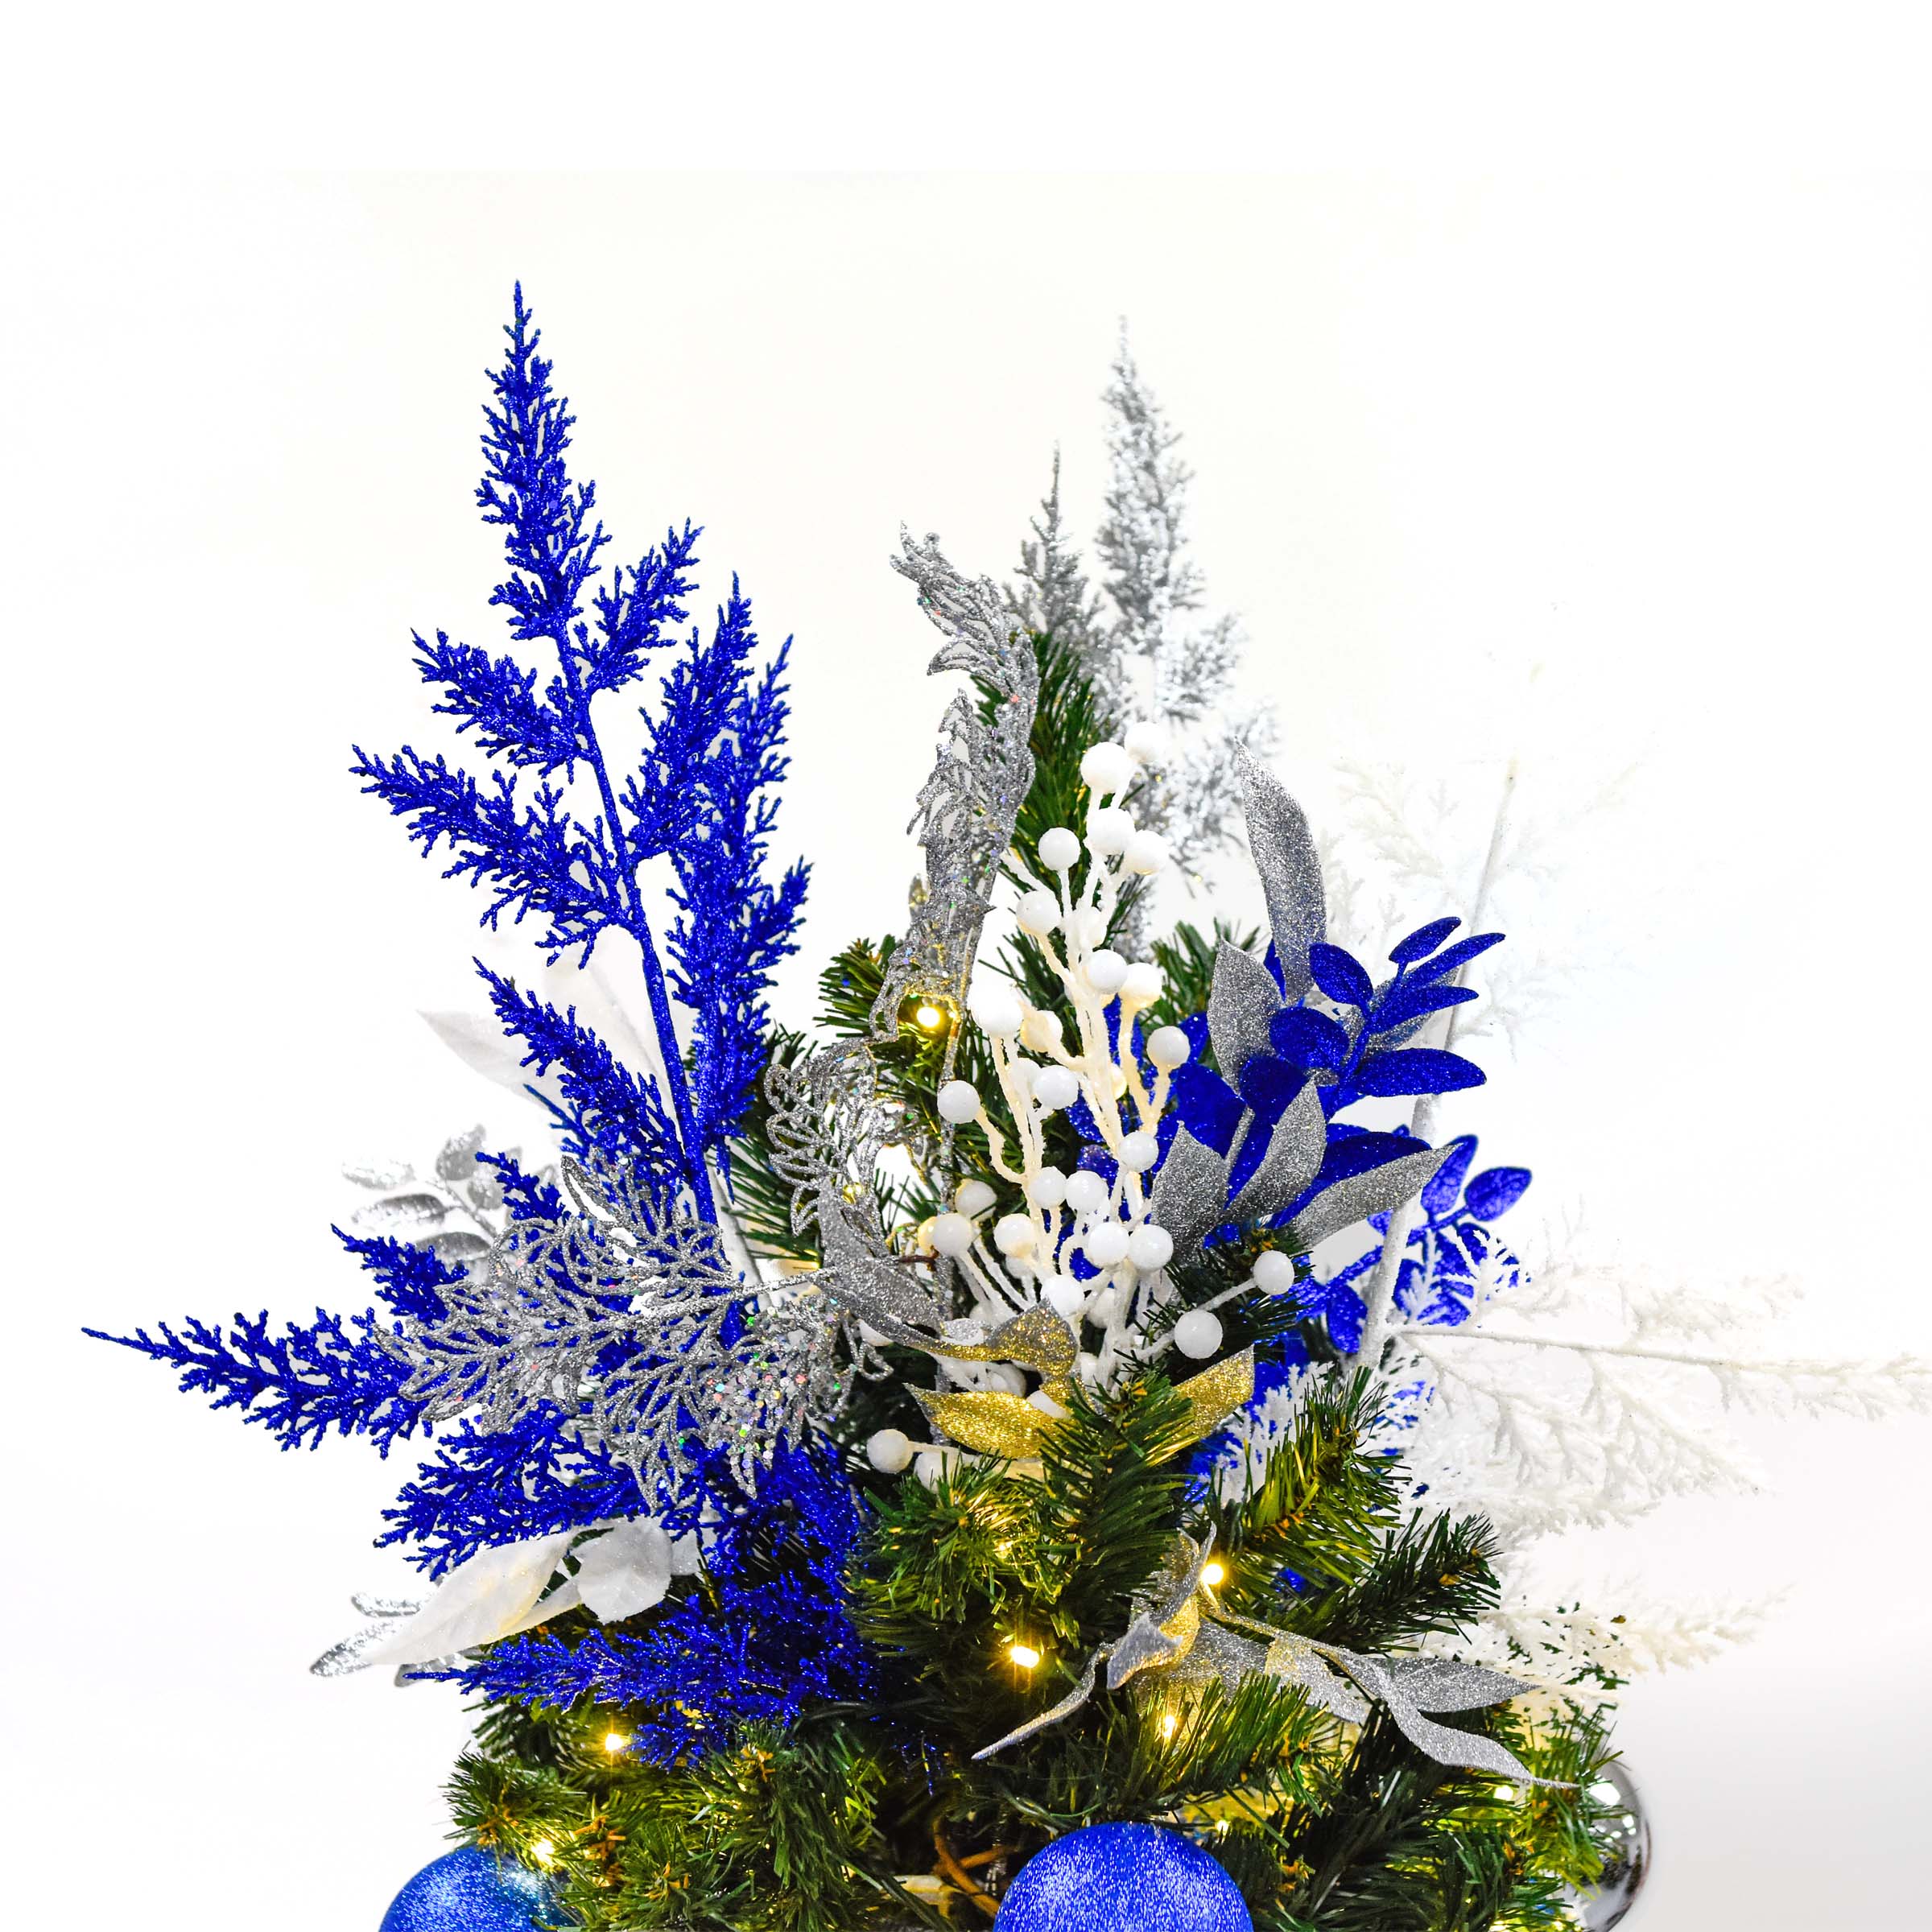 Blue, Silver, & White Christmas Tree Topper - Winter Whimsy